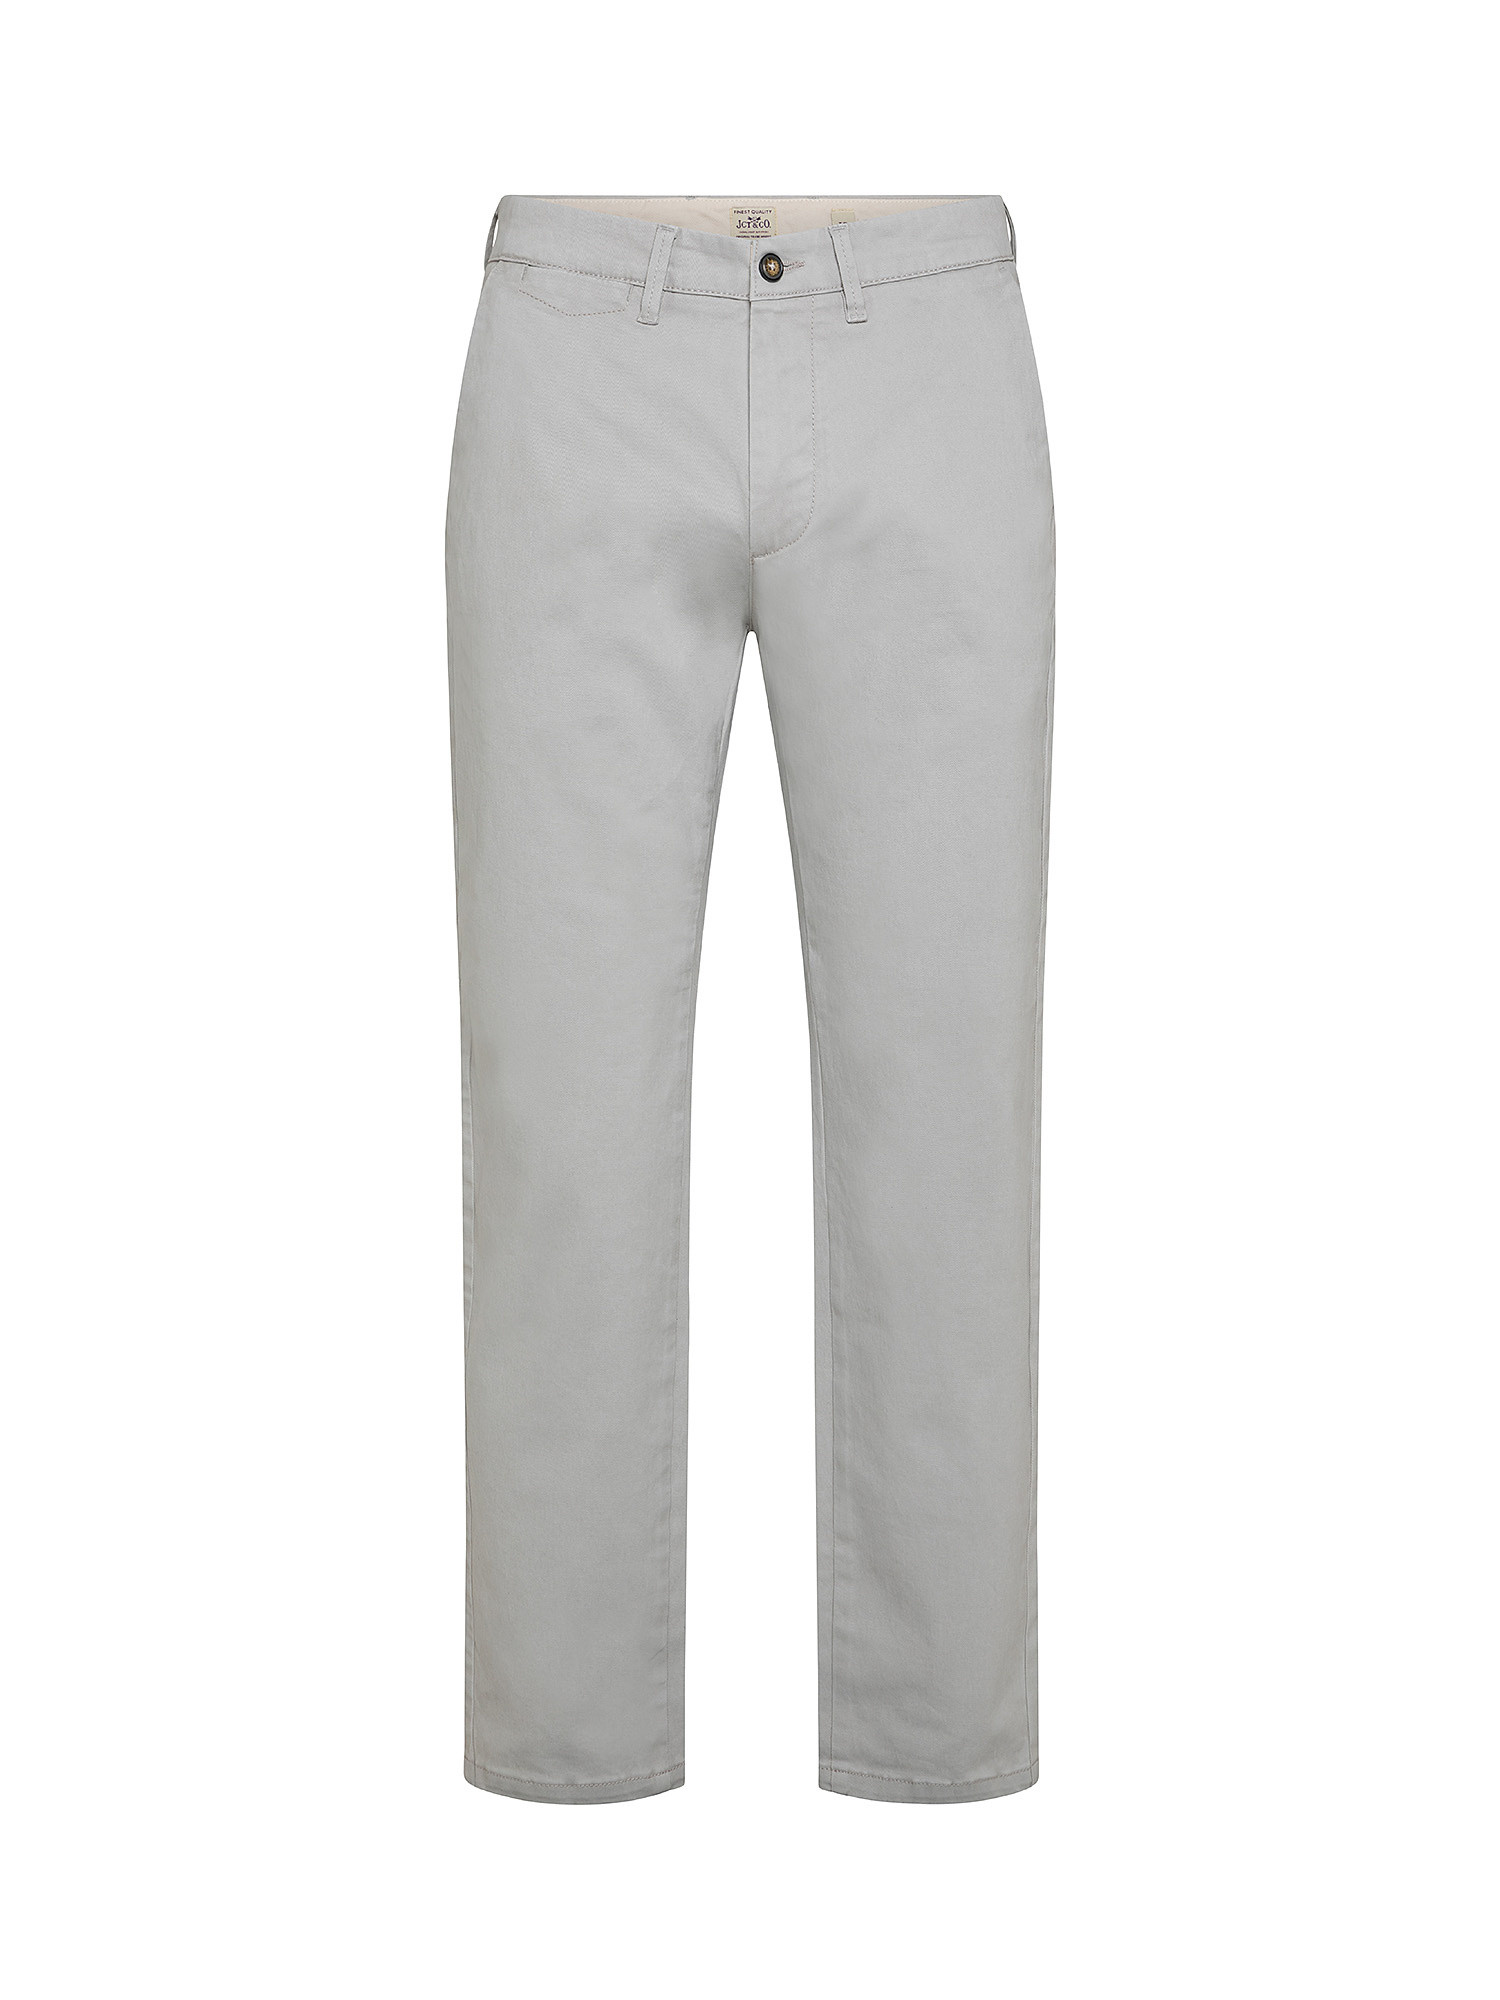 Stretch cotton chinos trousers, Pearl Grey, large image number 0